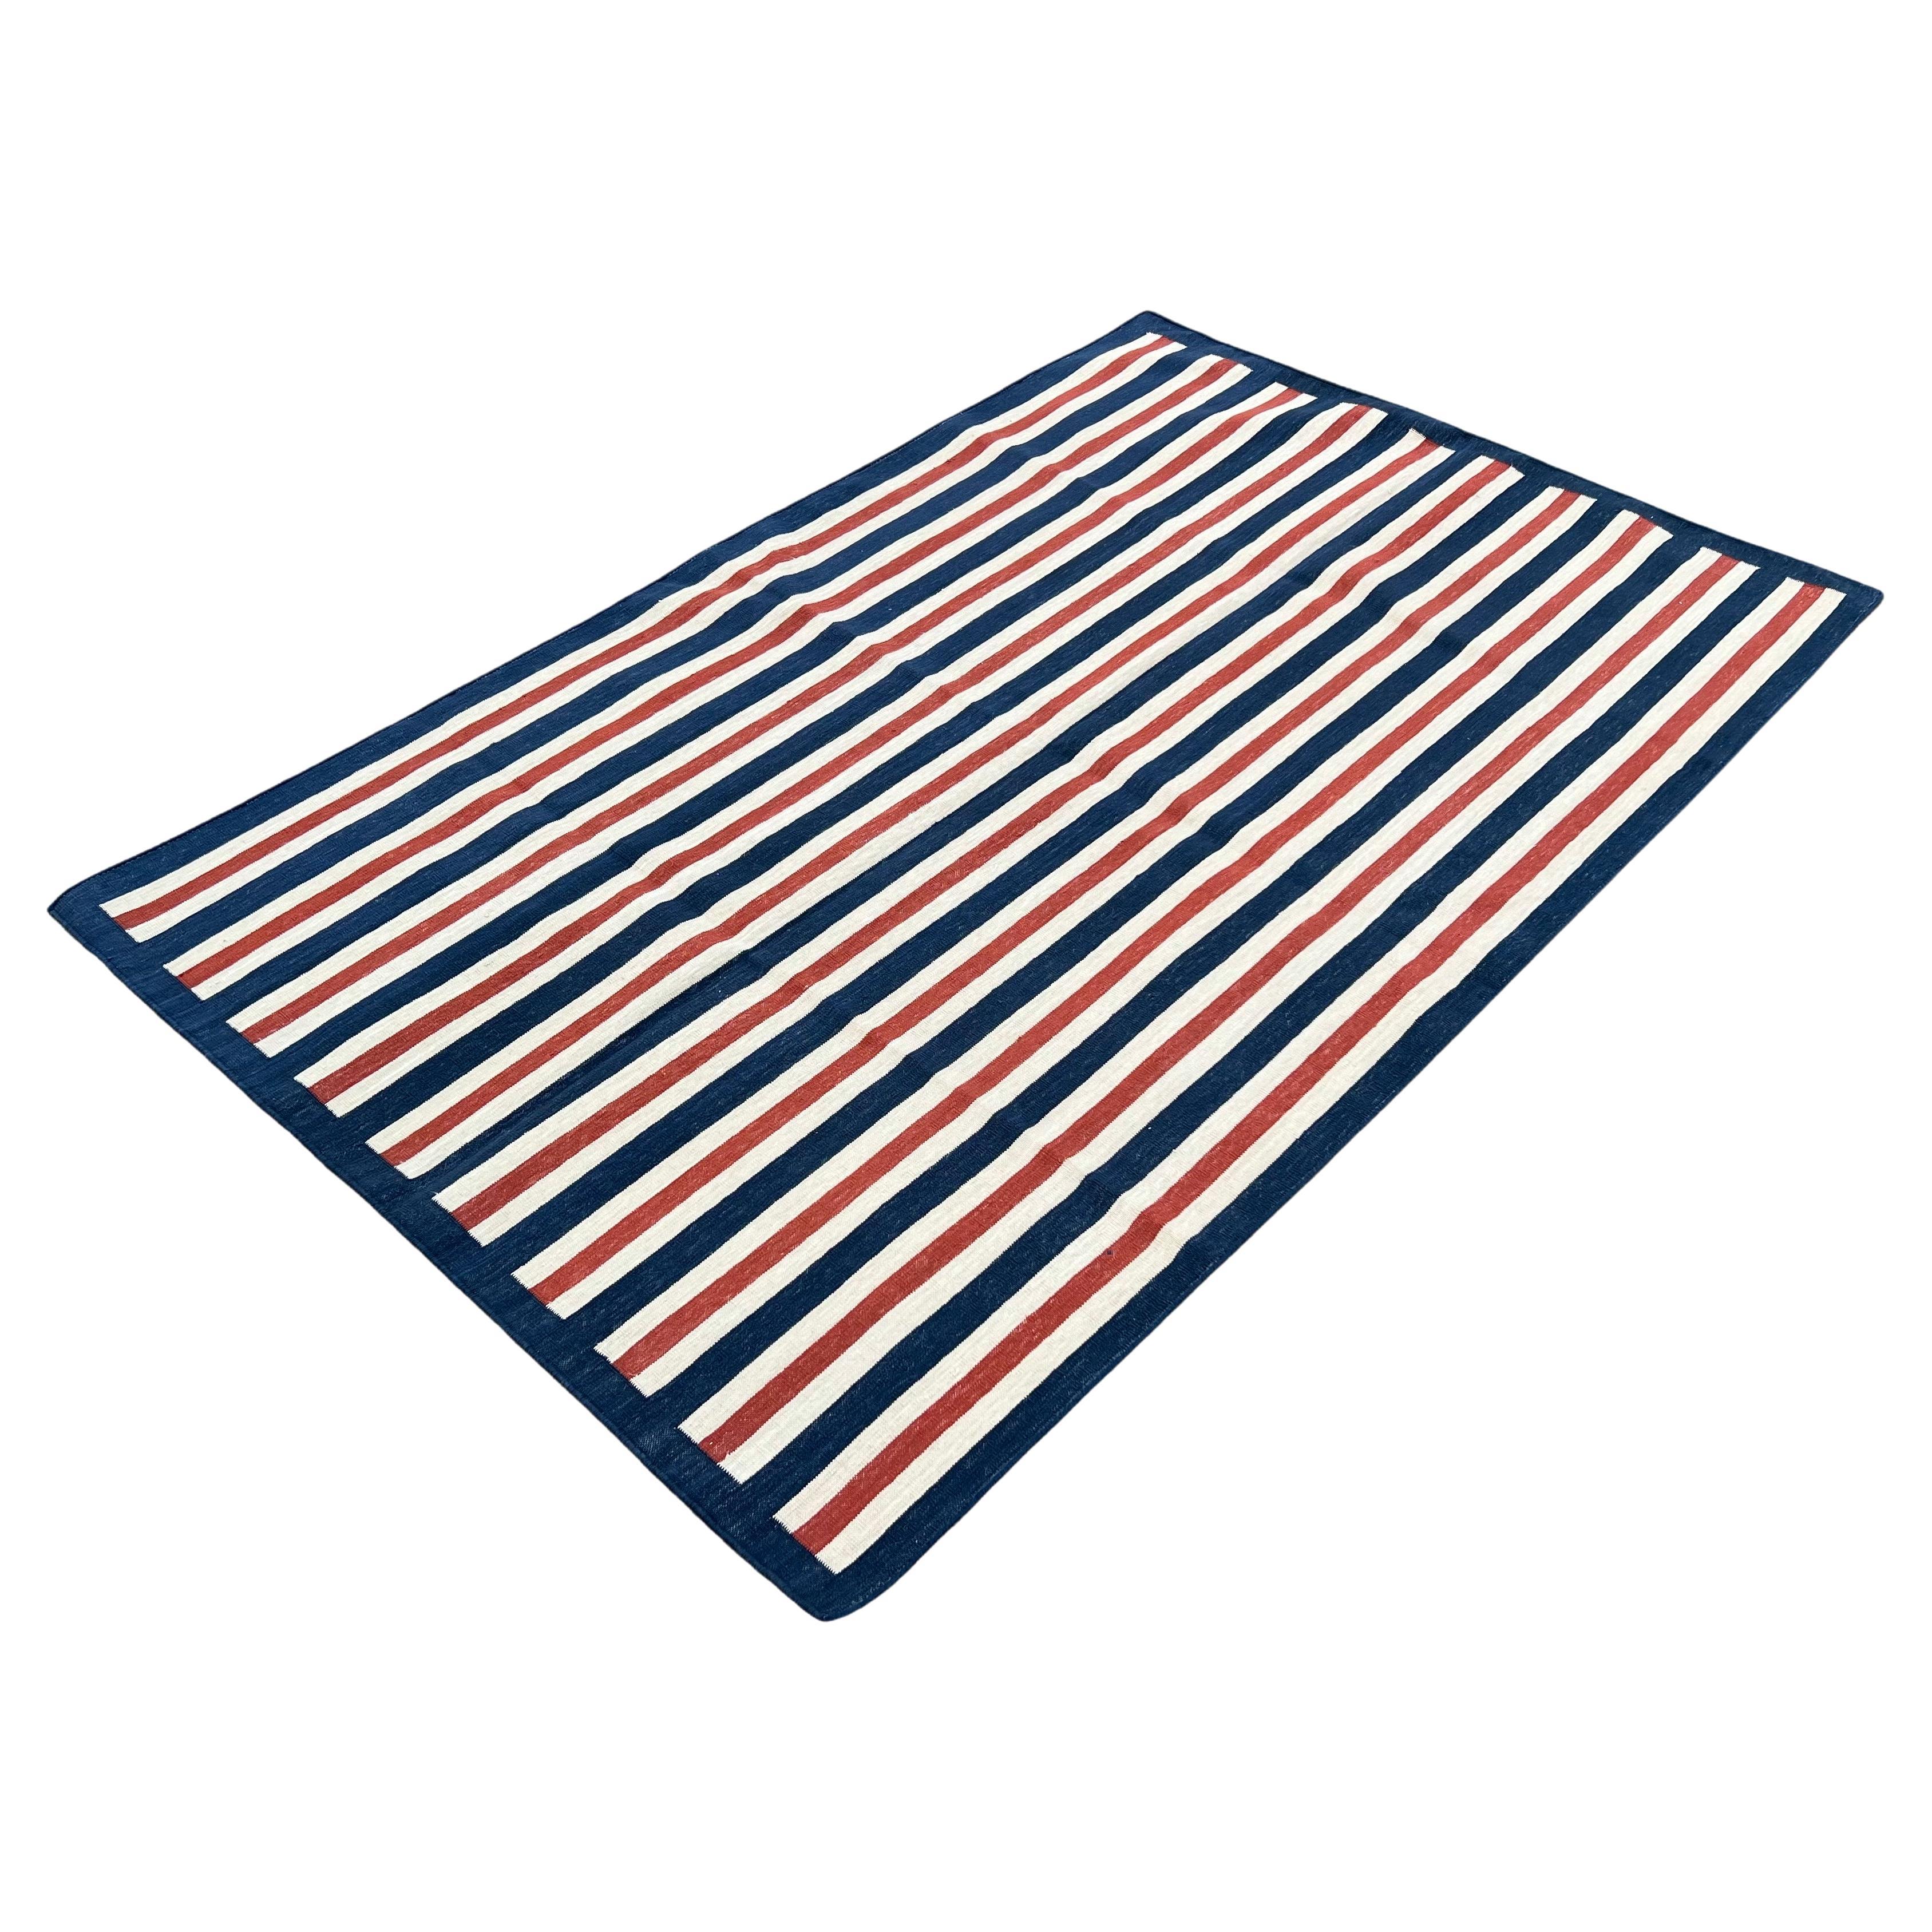 Handmade Cotton Area Flat Weave Rug, 3x5 Blue And Red Striped Indian Dhurrie Rug For Sale